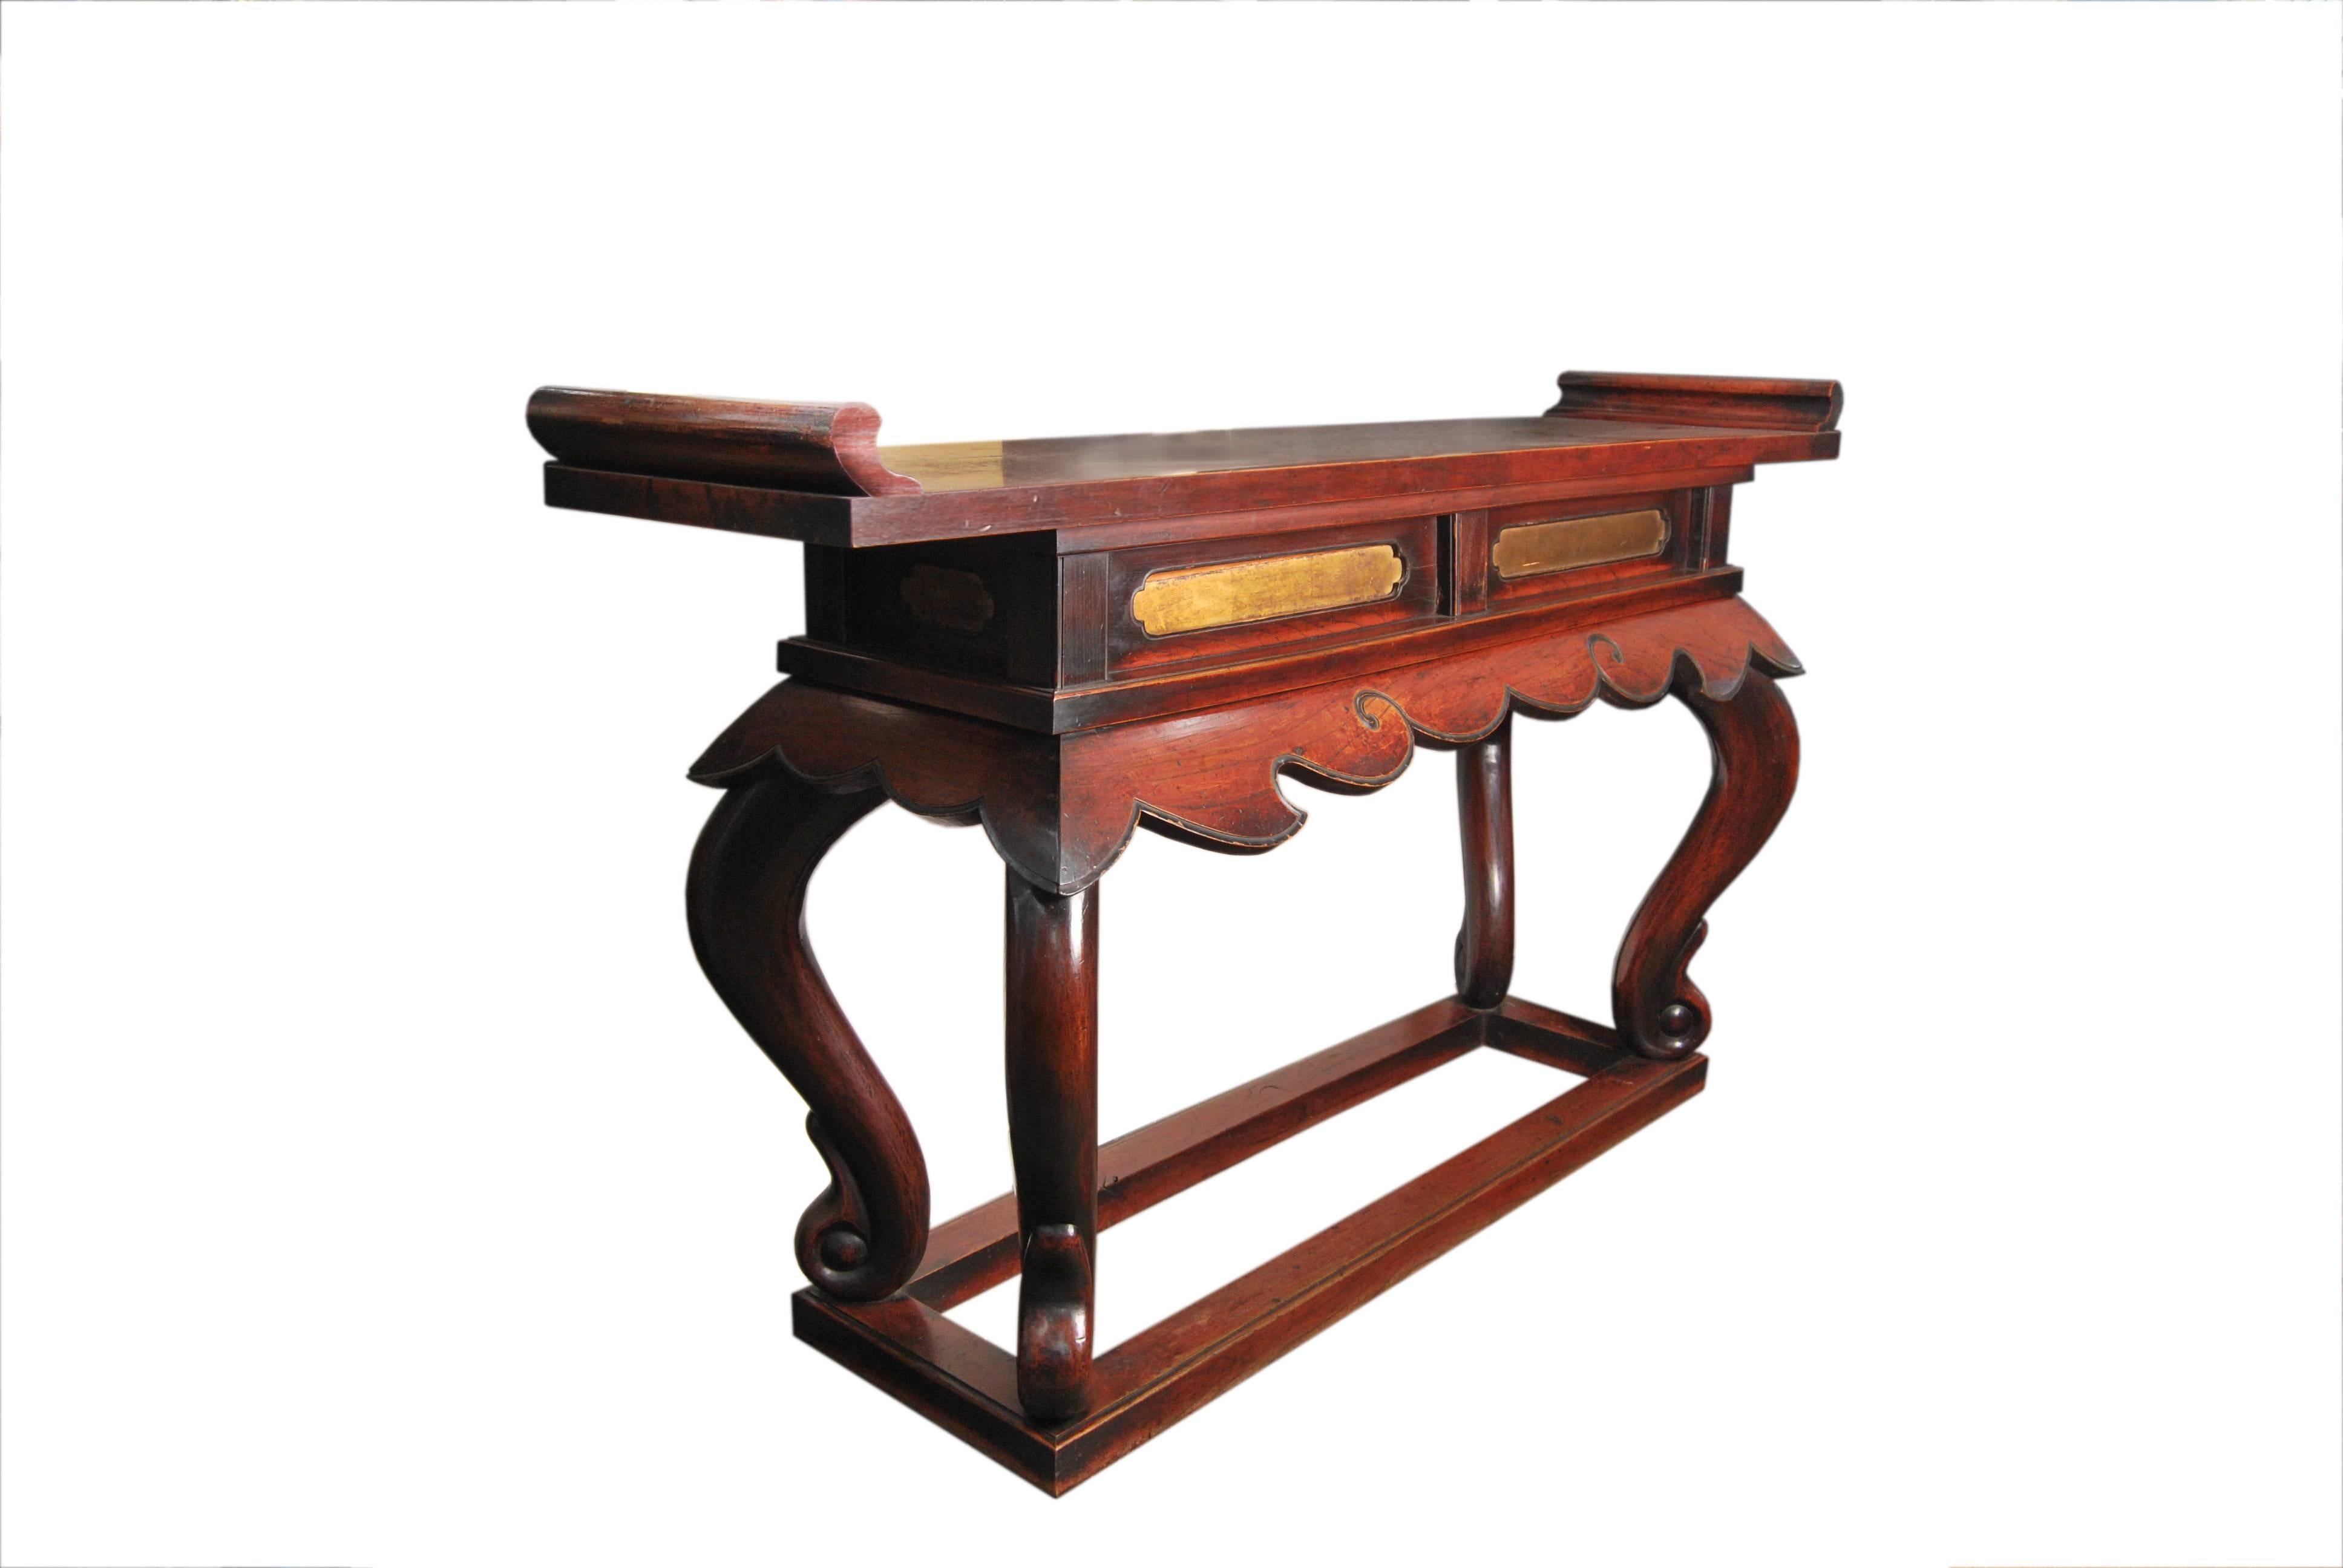 Rare Japanese Buddhist altar table built entirely from zelkova (Japanese elm) wood with a lustrous reddish toned fuki-urushi wiped lacquer finish and patinated by incense smoke in its original setting.

Adorned with gilded paneling inset above a